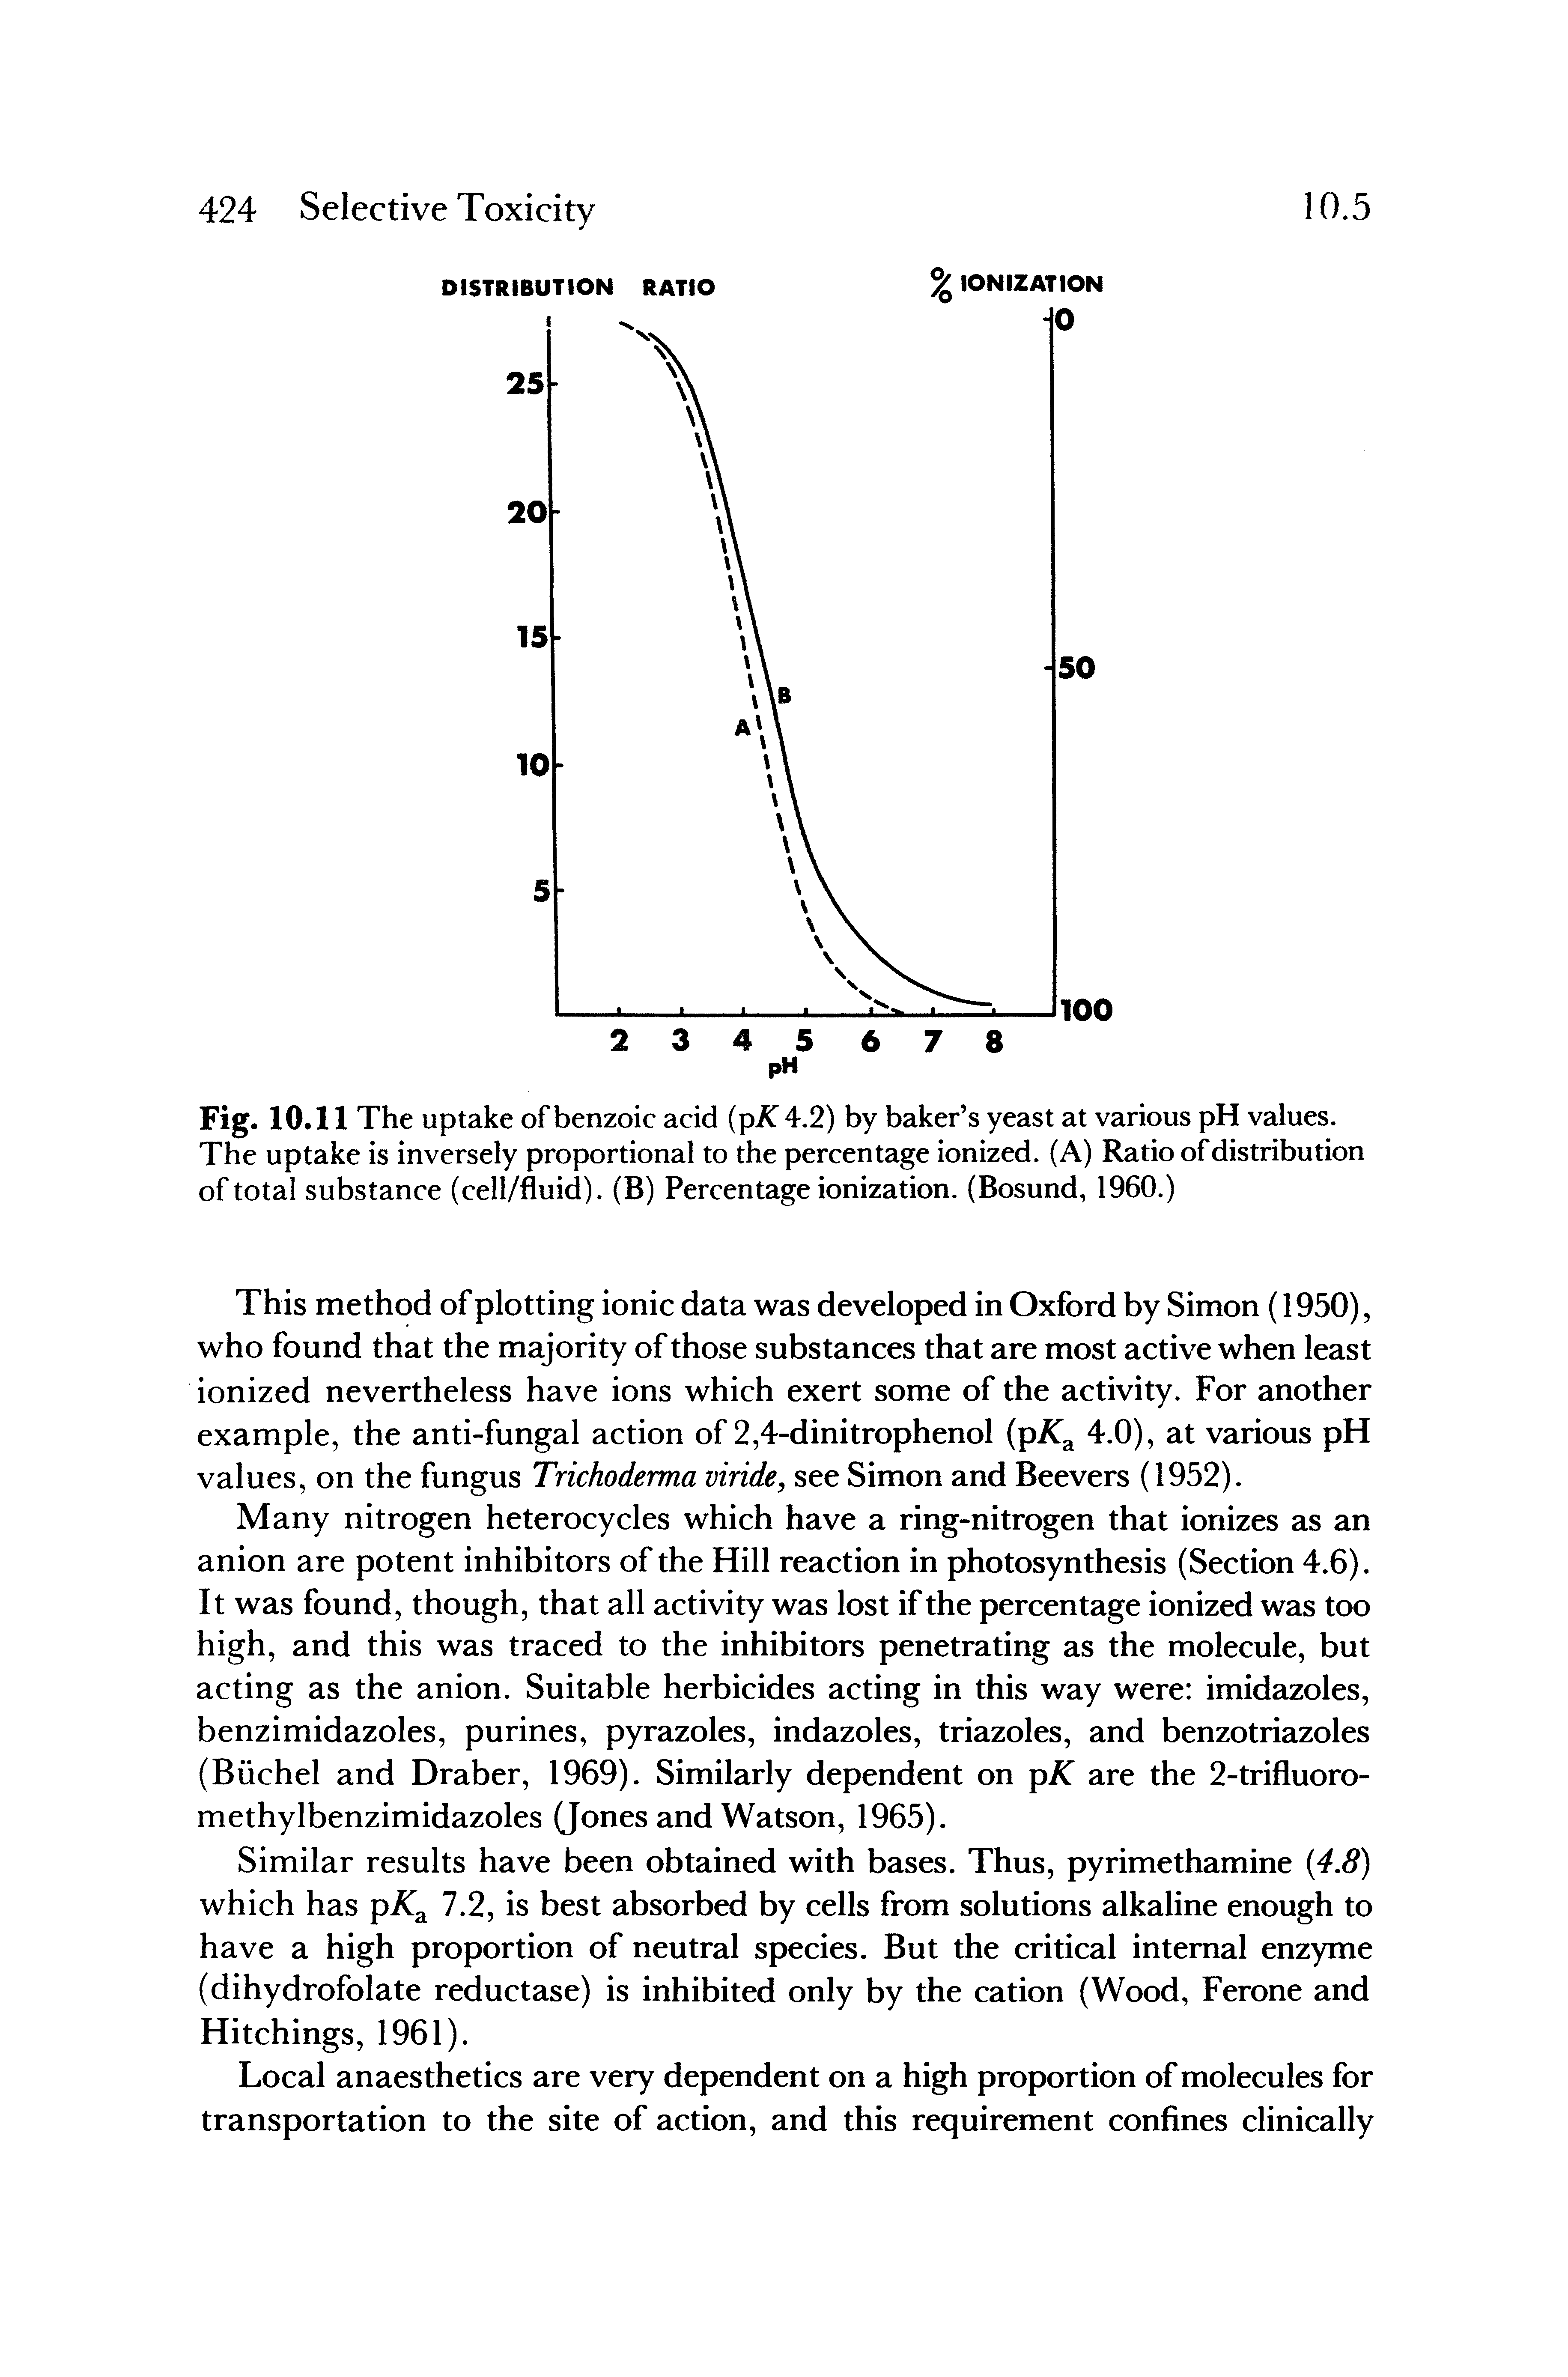 Fig. 10.11 The uptake of benzoic acid (pi 4.2) by baker s yeast at various pH values. The uptake is inversely proportional to the percentage ionized. (A) Ratio of distribution of total substance (cell/fluid). (B) Percentage ionization. (Bosund, 1960.)...